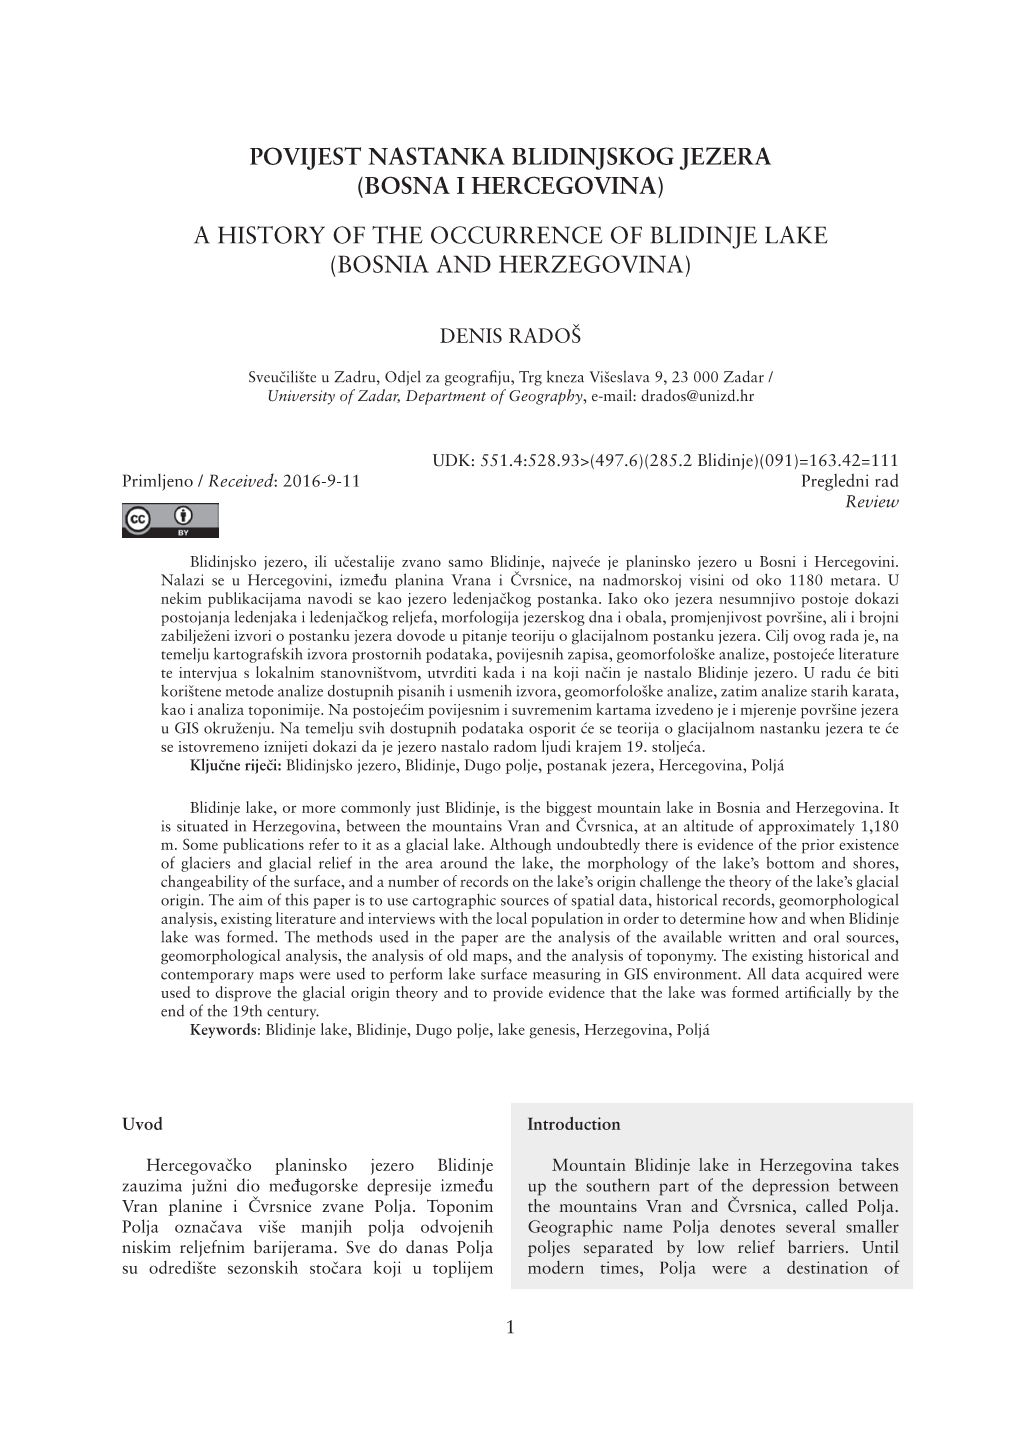 A History of the Occurrence of Blidinje Lake (Bosnia and Herzegovina)